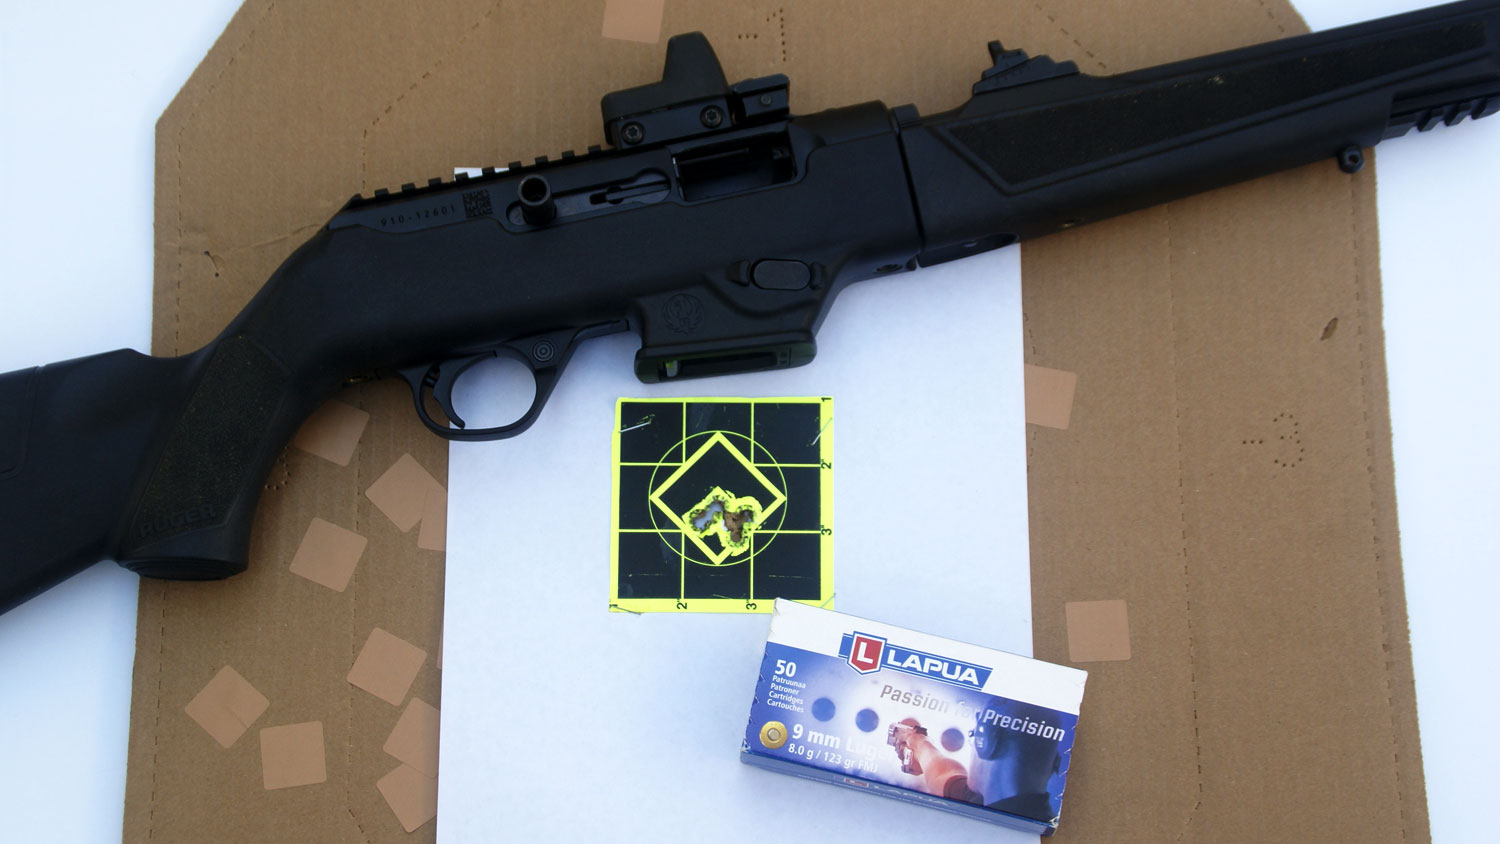 Lapua 9mm accuracy test in Ruger PC Carbine